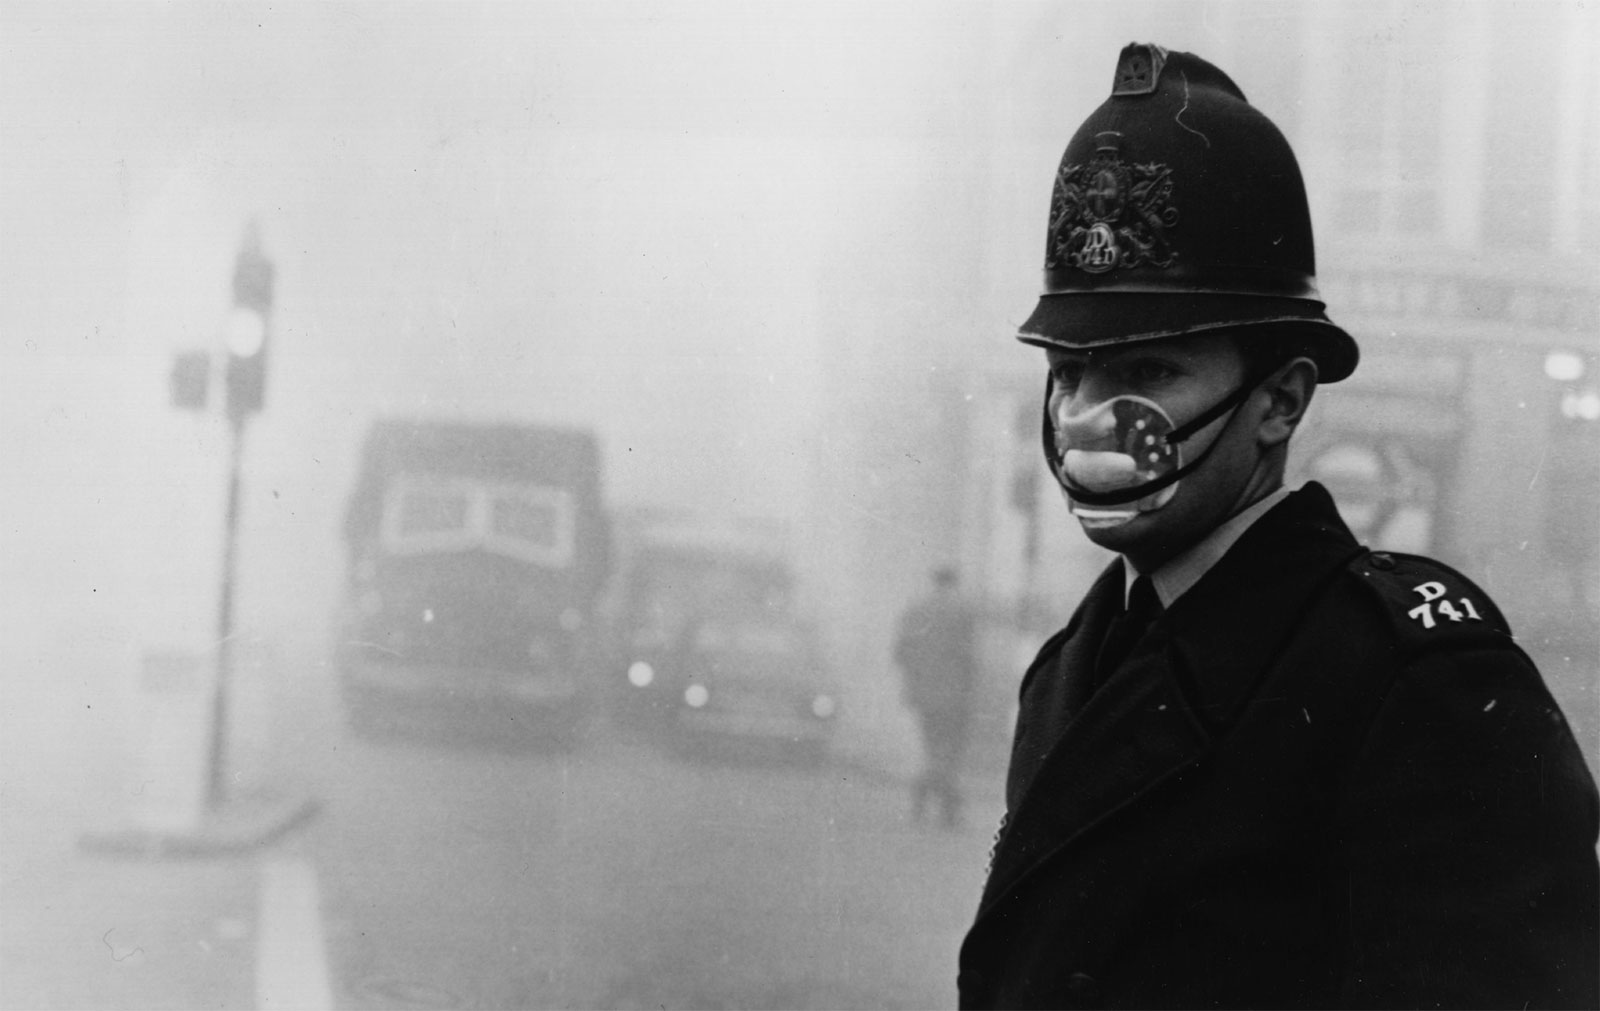 The Great Smog London